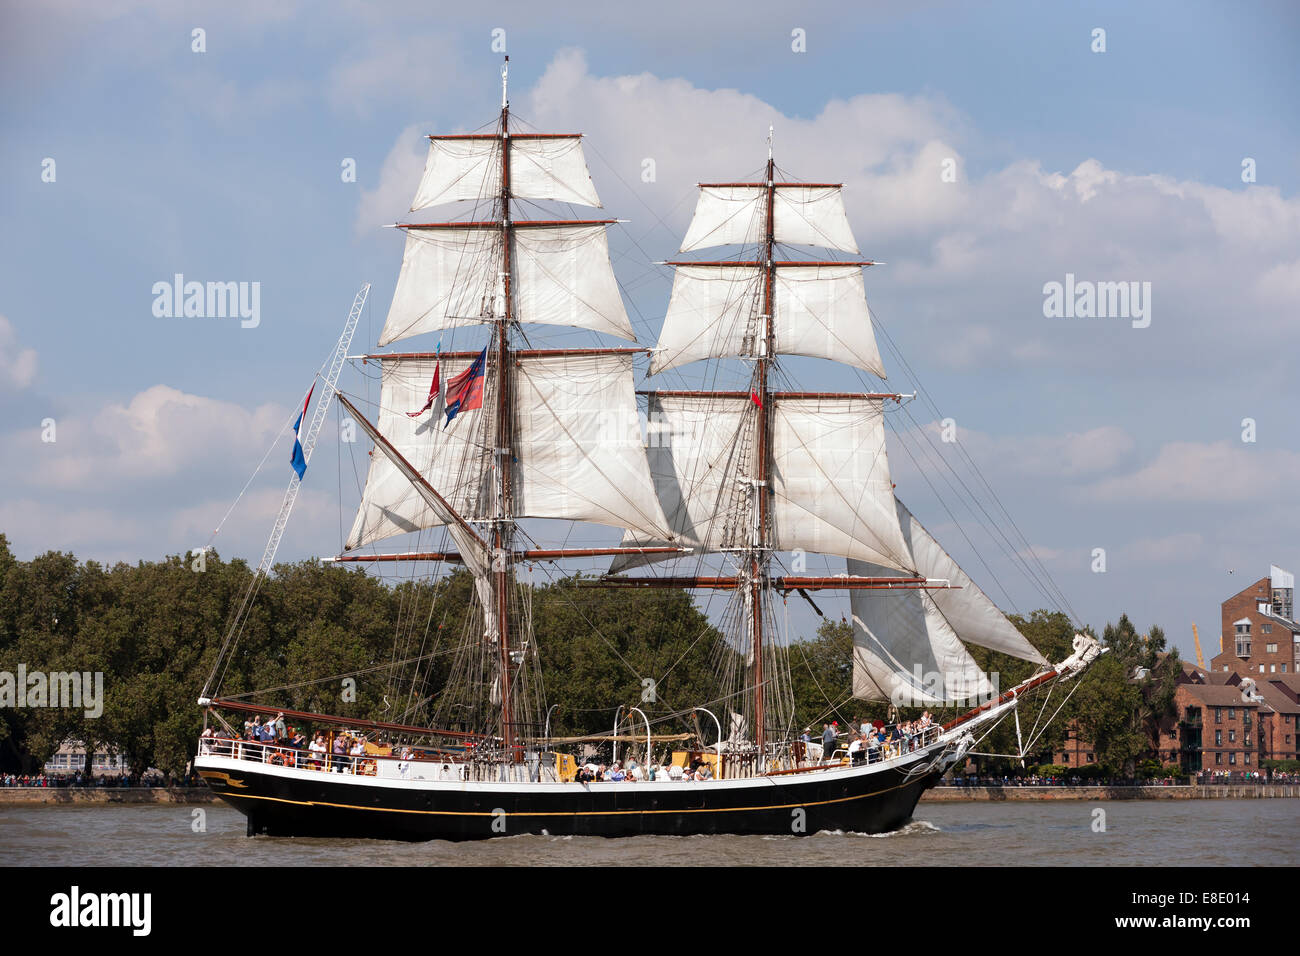 Morgenster, a Dutch brig,  taking part in the parade of sail, during the Tall Ships Festival, Greenwich. Stock Photo